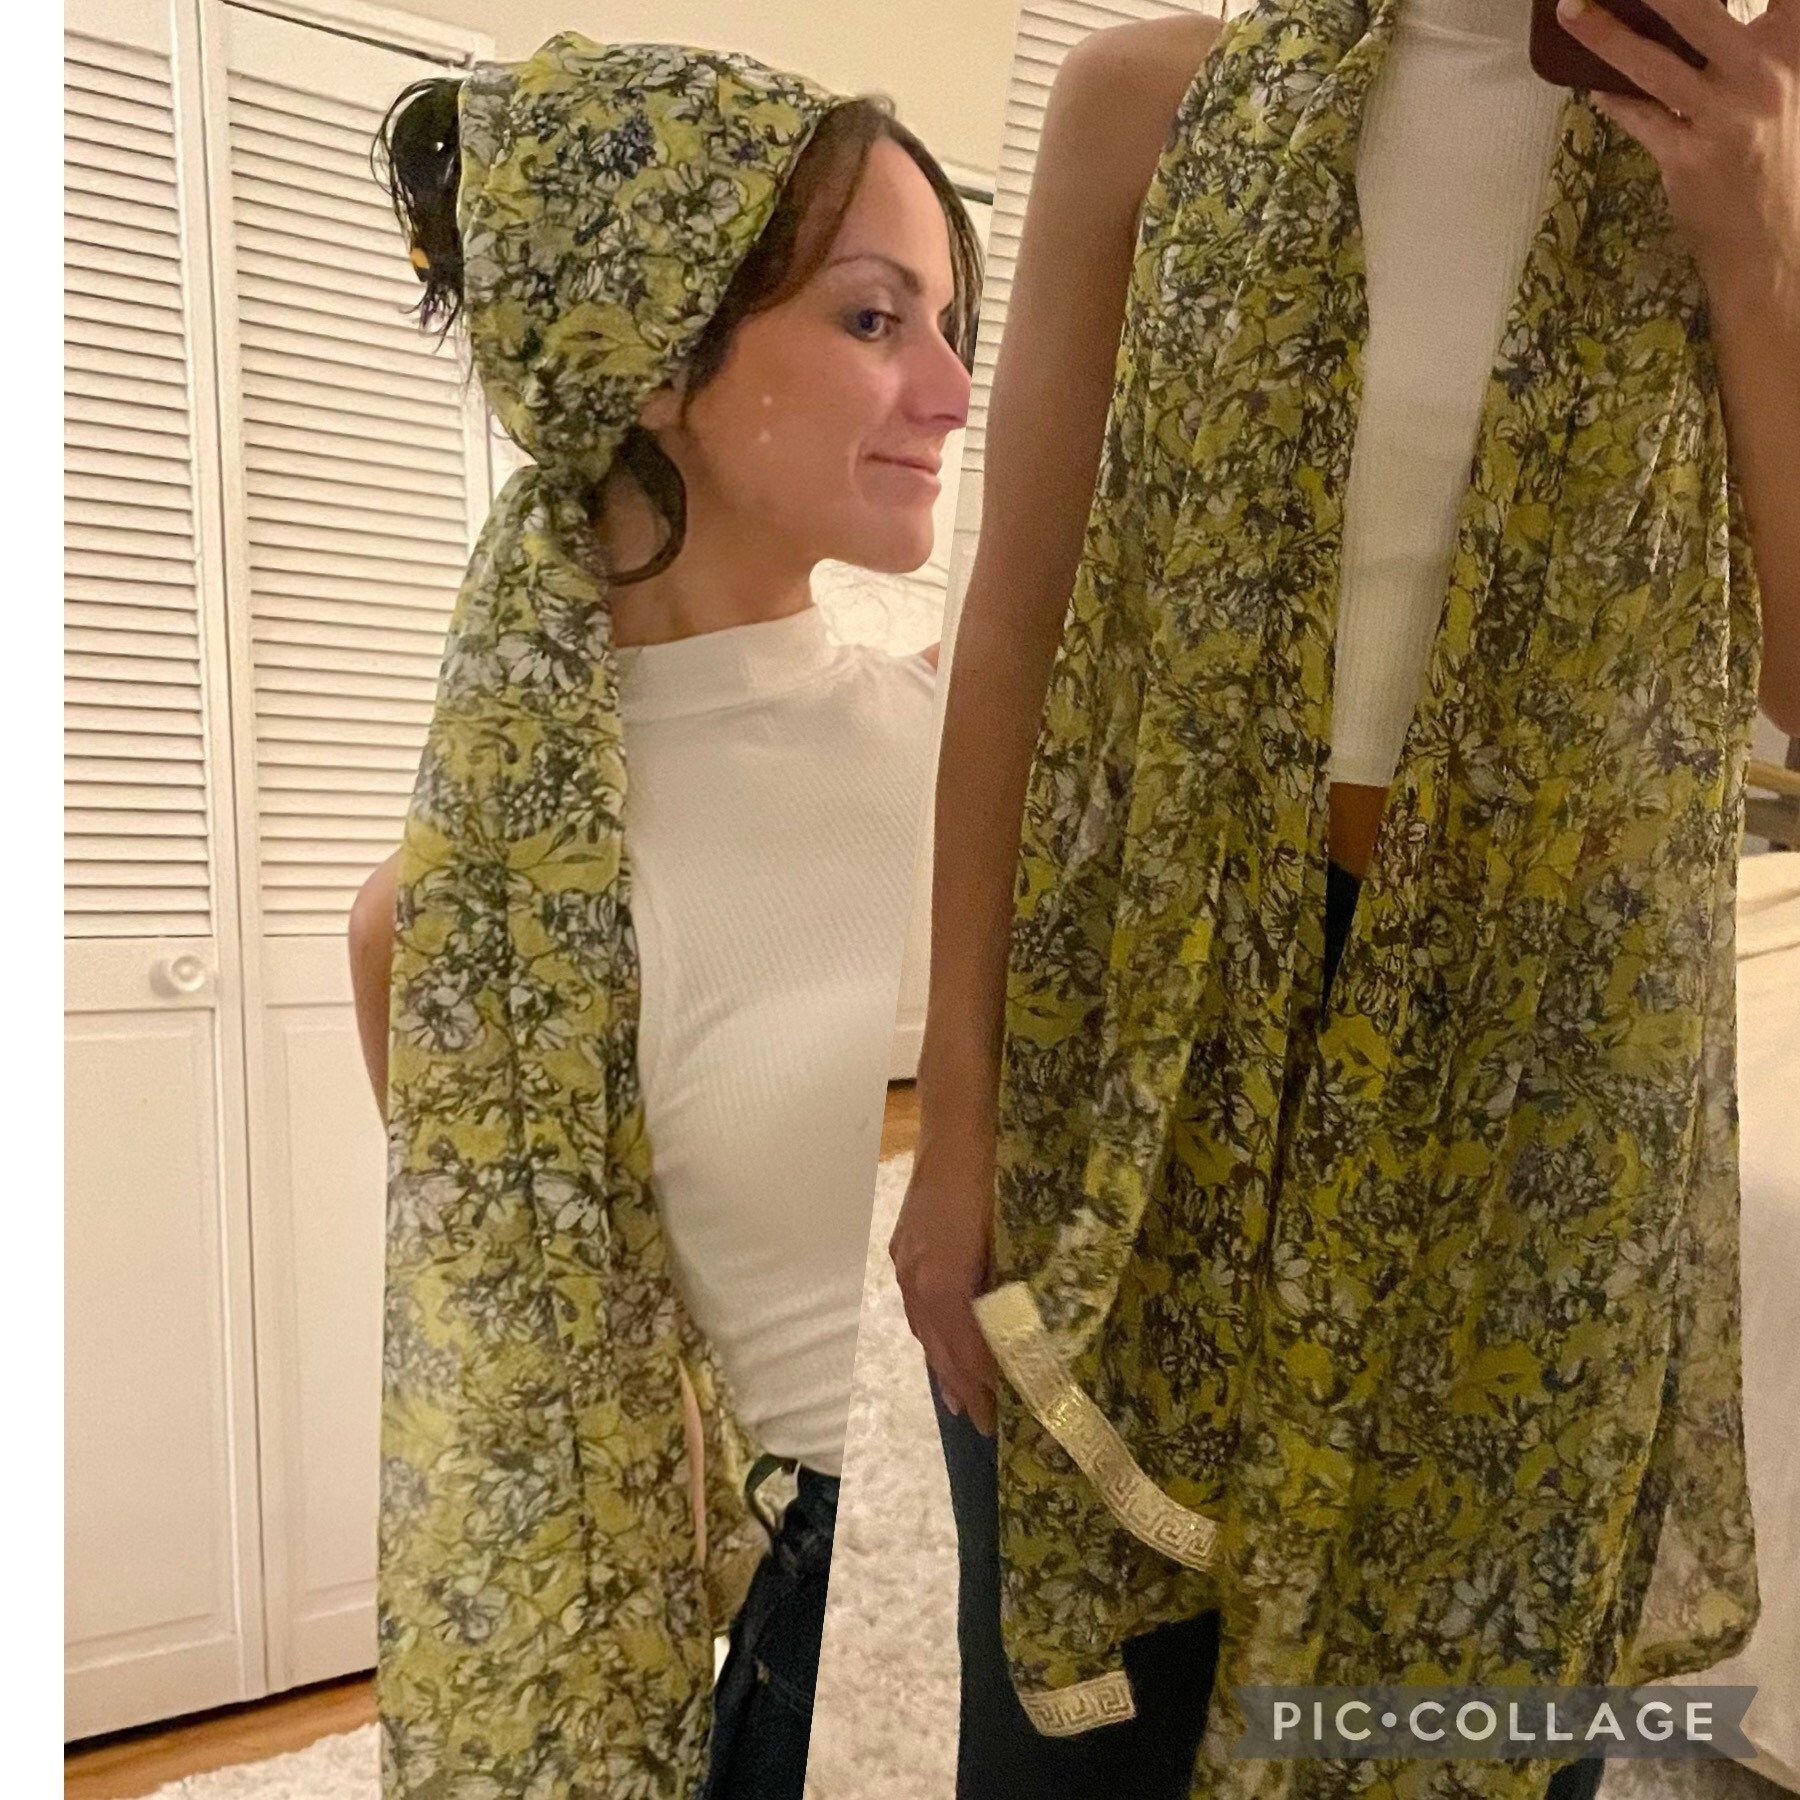 How to Style Chiffon Scarf